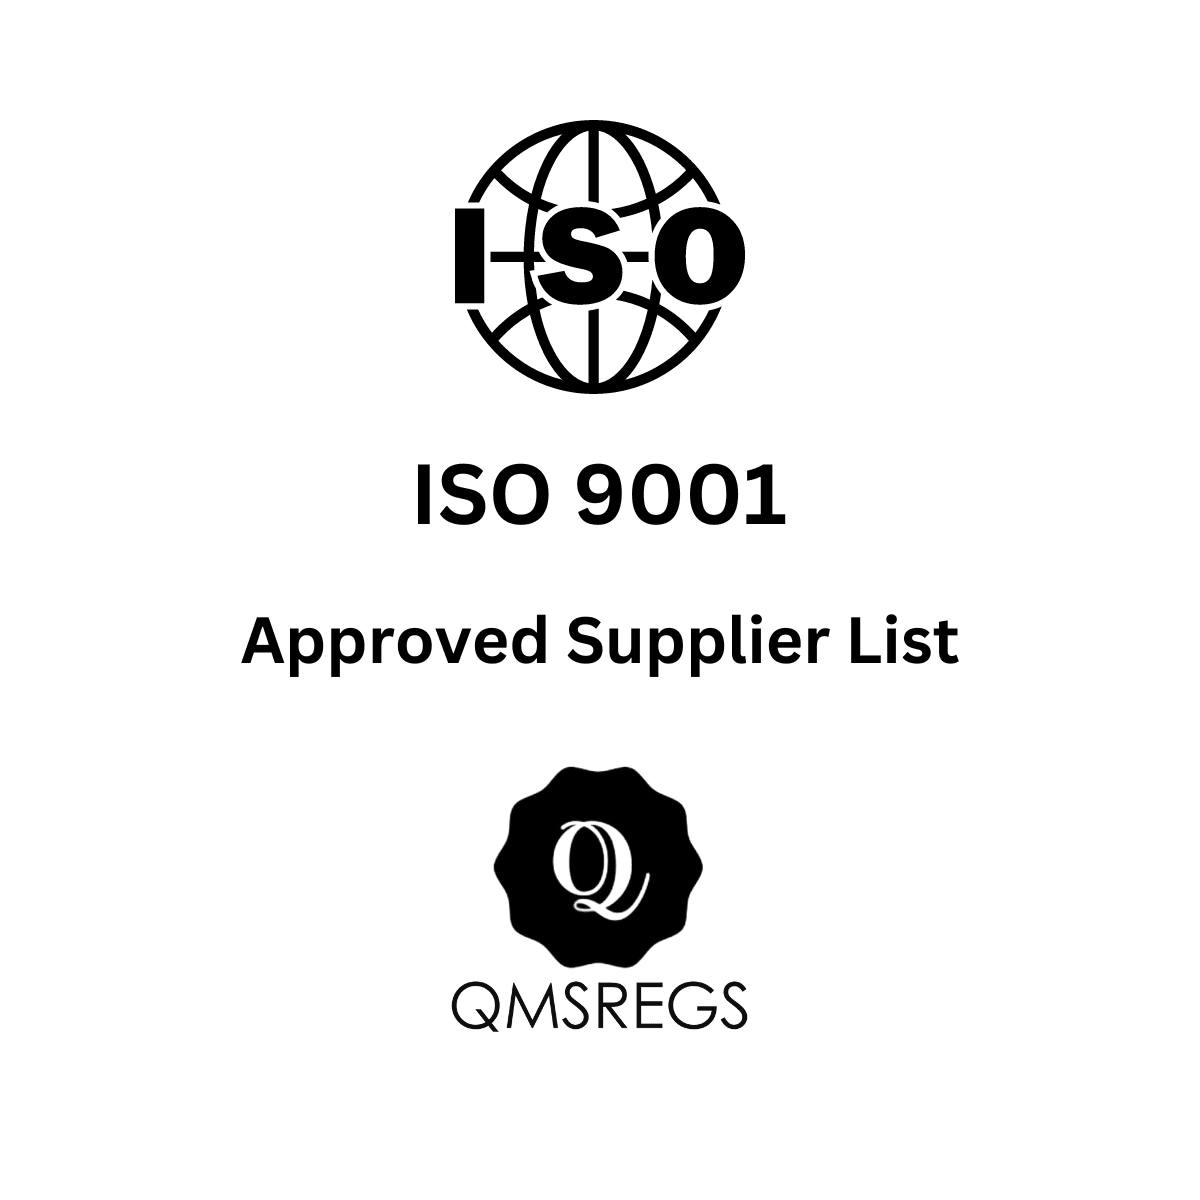 ISO 9001 Approved Supplier List Template